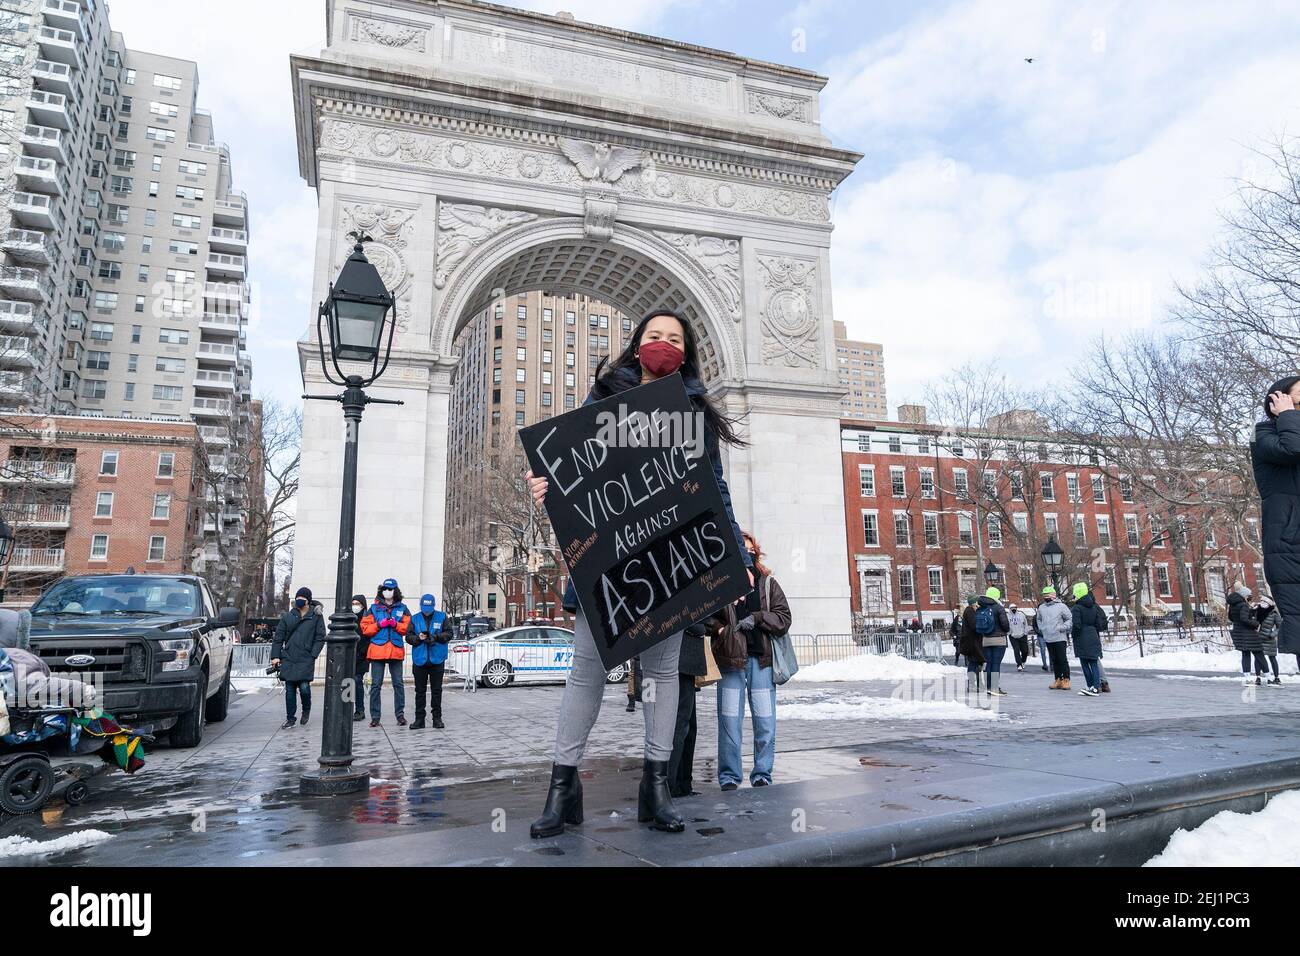 New York, United States. 20th Feb, 2021. More than 200 people gathered on Washington Square Park to rally in support Aisian community, against hate crime and white nationalism. Rally held in New York on February 20, 2021. Rally was organized by ANTIFA (anti-fascist movement) and Abolitionist Community. (Photo by Lev Radin/Sipa USA) Credit: Sipa USA/Alamy Live News Stock Photo